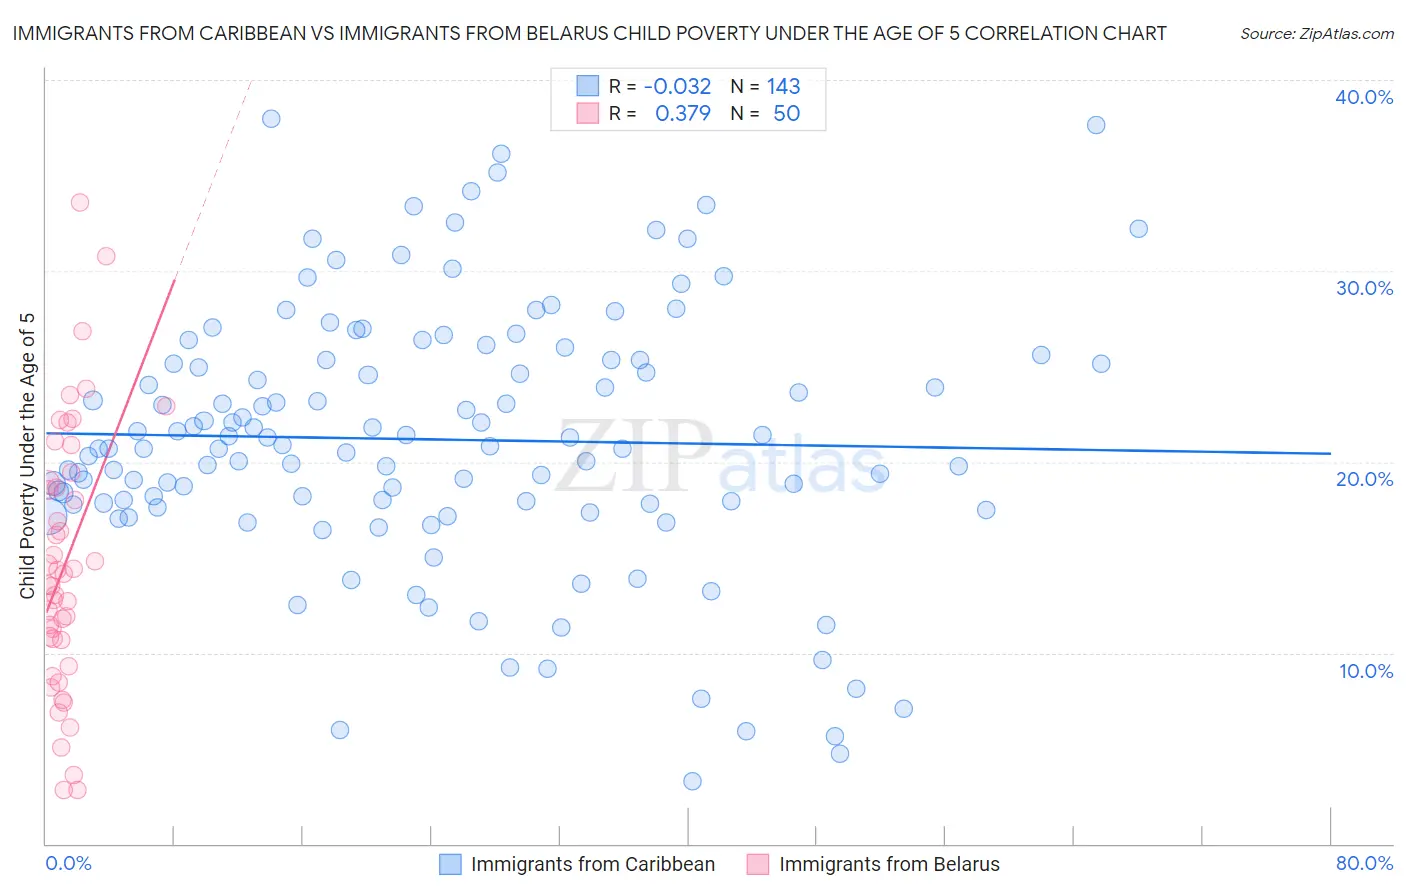 Immigrants from Caribbean vs Immigrants from Belarus Child Poverty Under the Age of 5